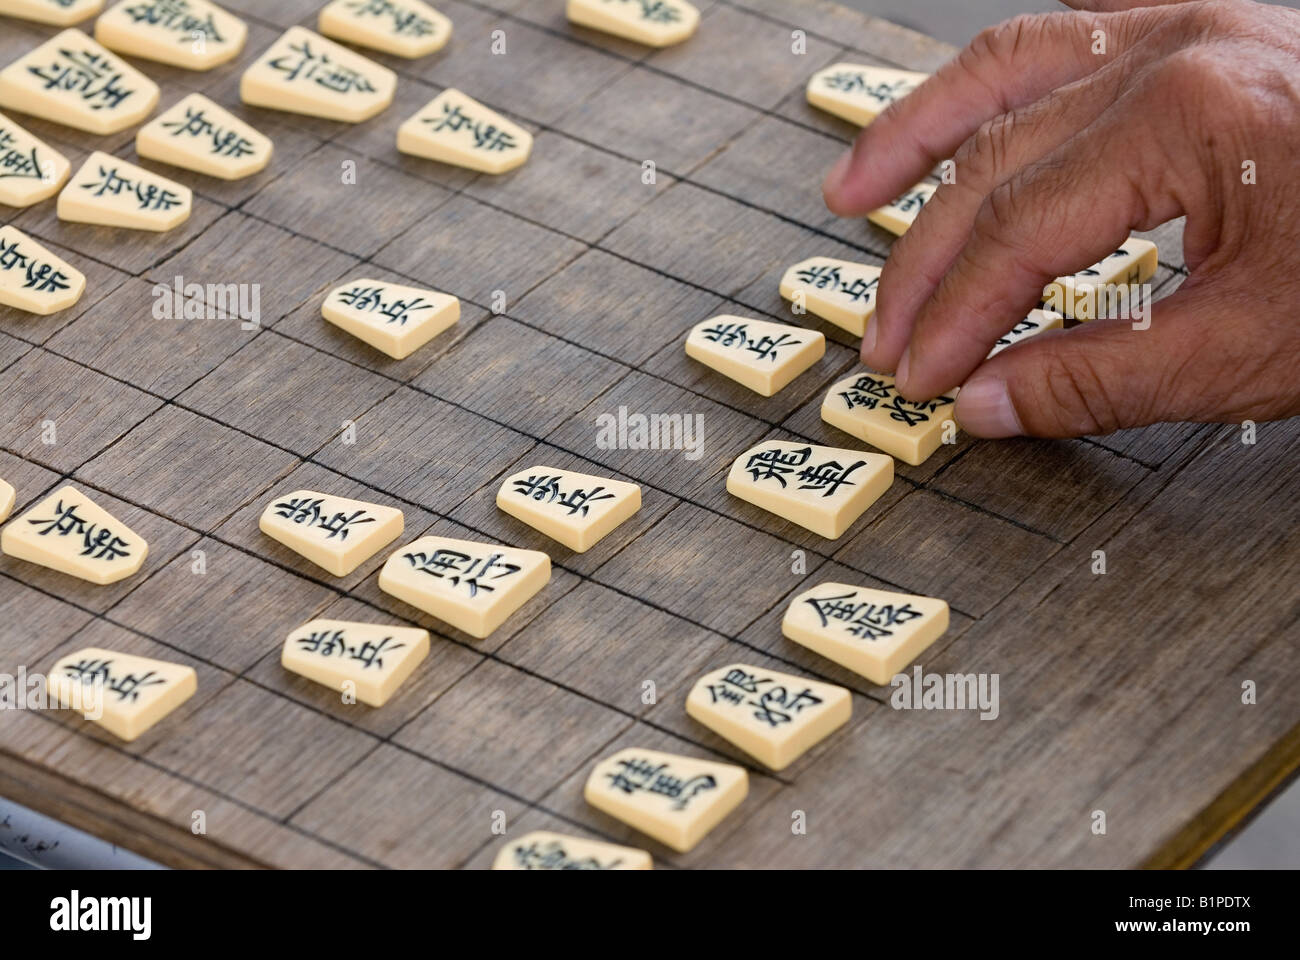 A man makes a move during a game of shogi which is similar to the Western game of chess. Stock Photo